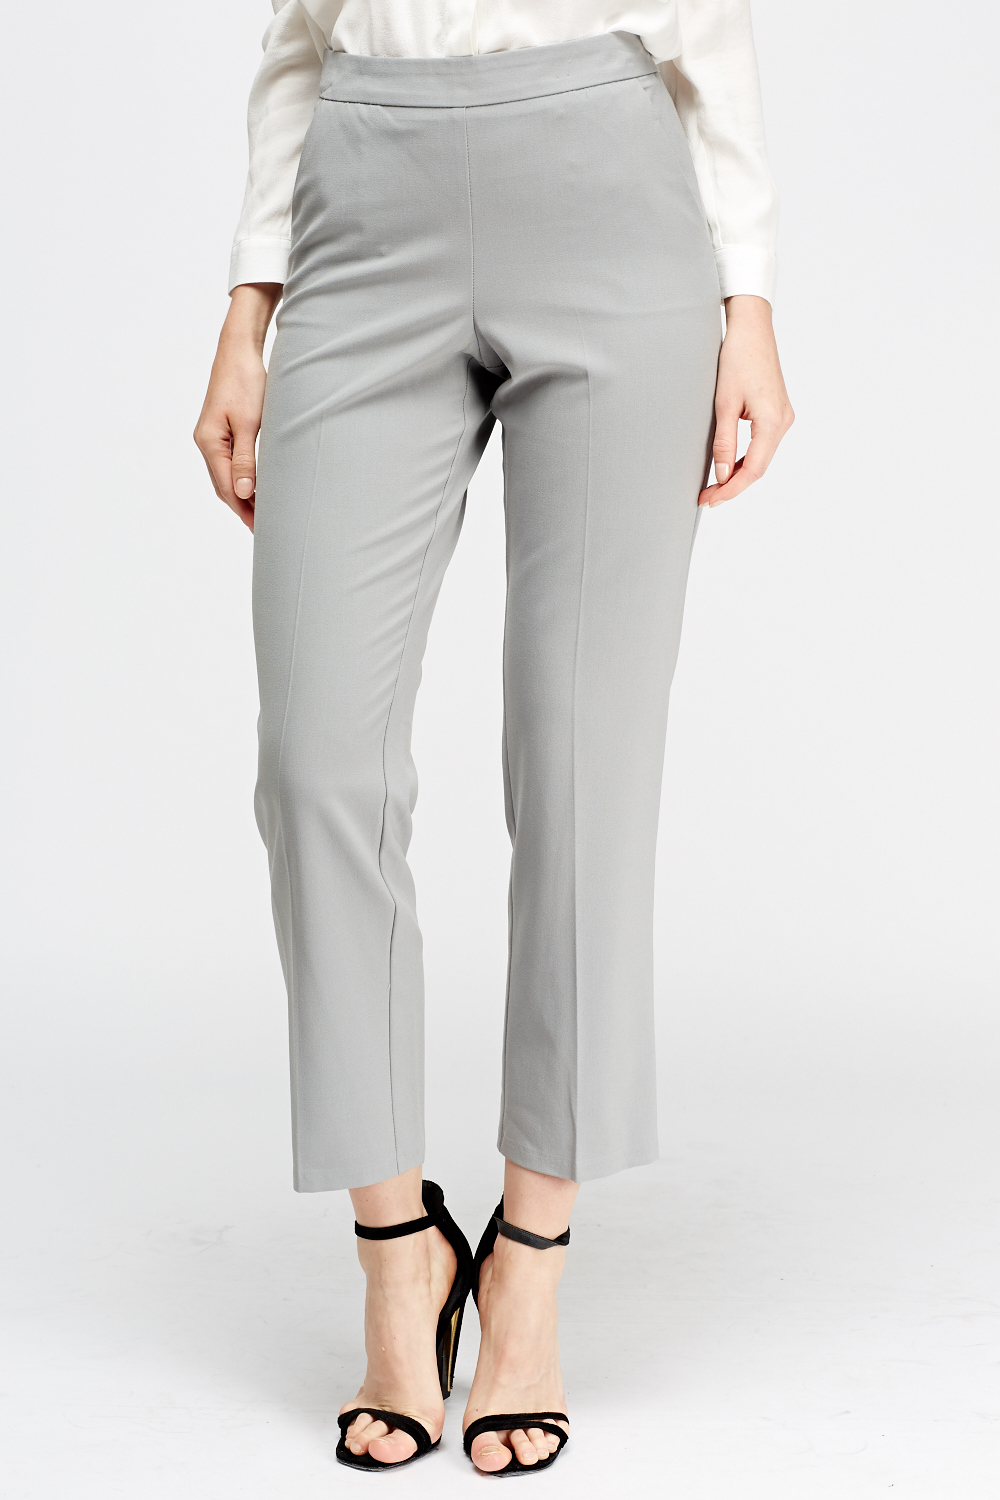 Grey Cigarette Trousers - Just $7